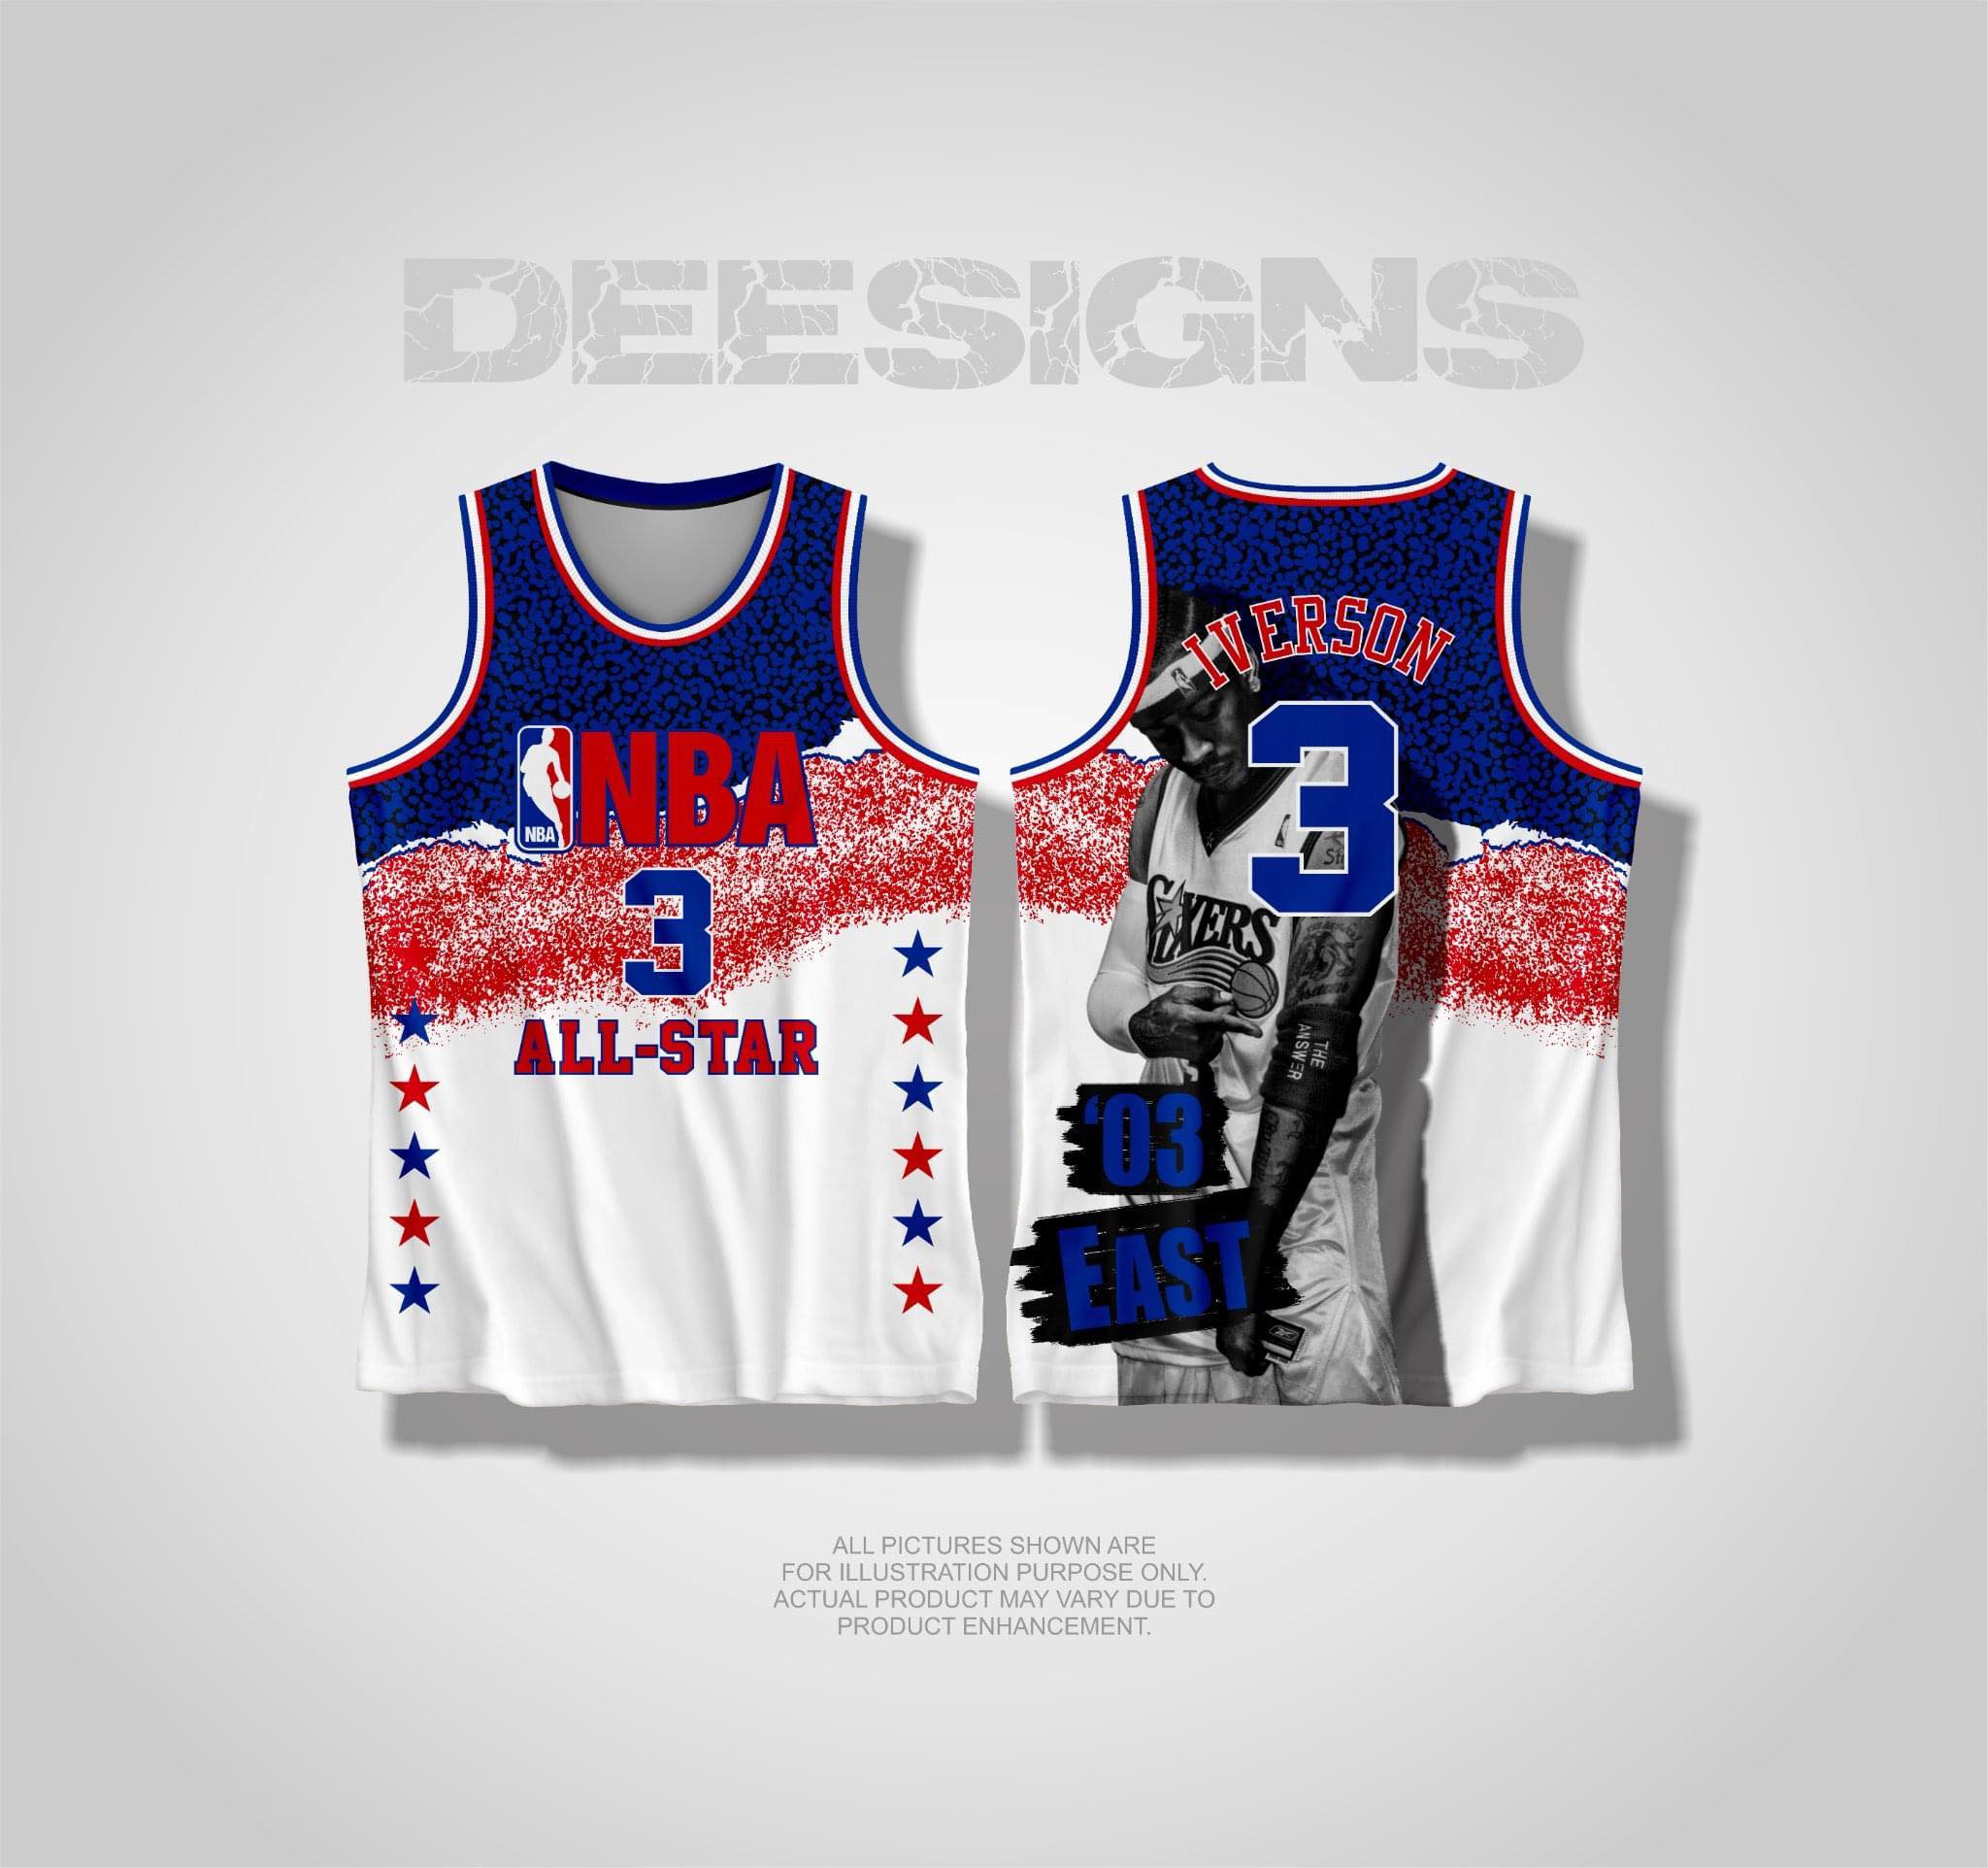 NEW ALLSTAR 06 ALLEN IVERSON BASKETBALL JERSEY FREE CUSTOMIZE OF NAME &  NUMBER ONLY full sublimation high quality fabrics/ trending jersey